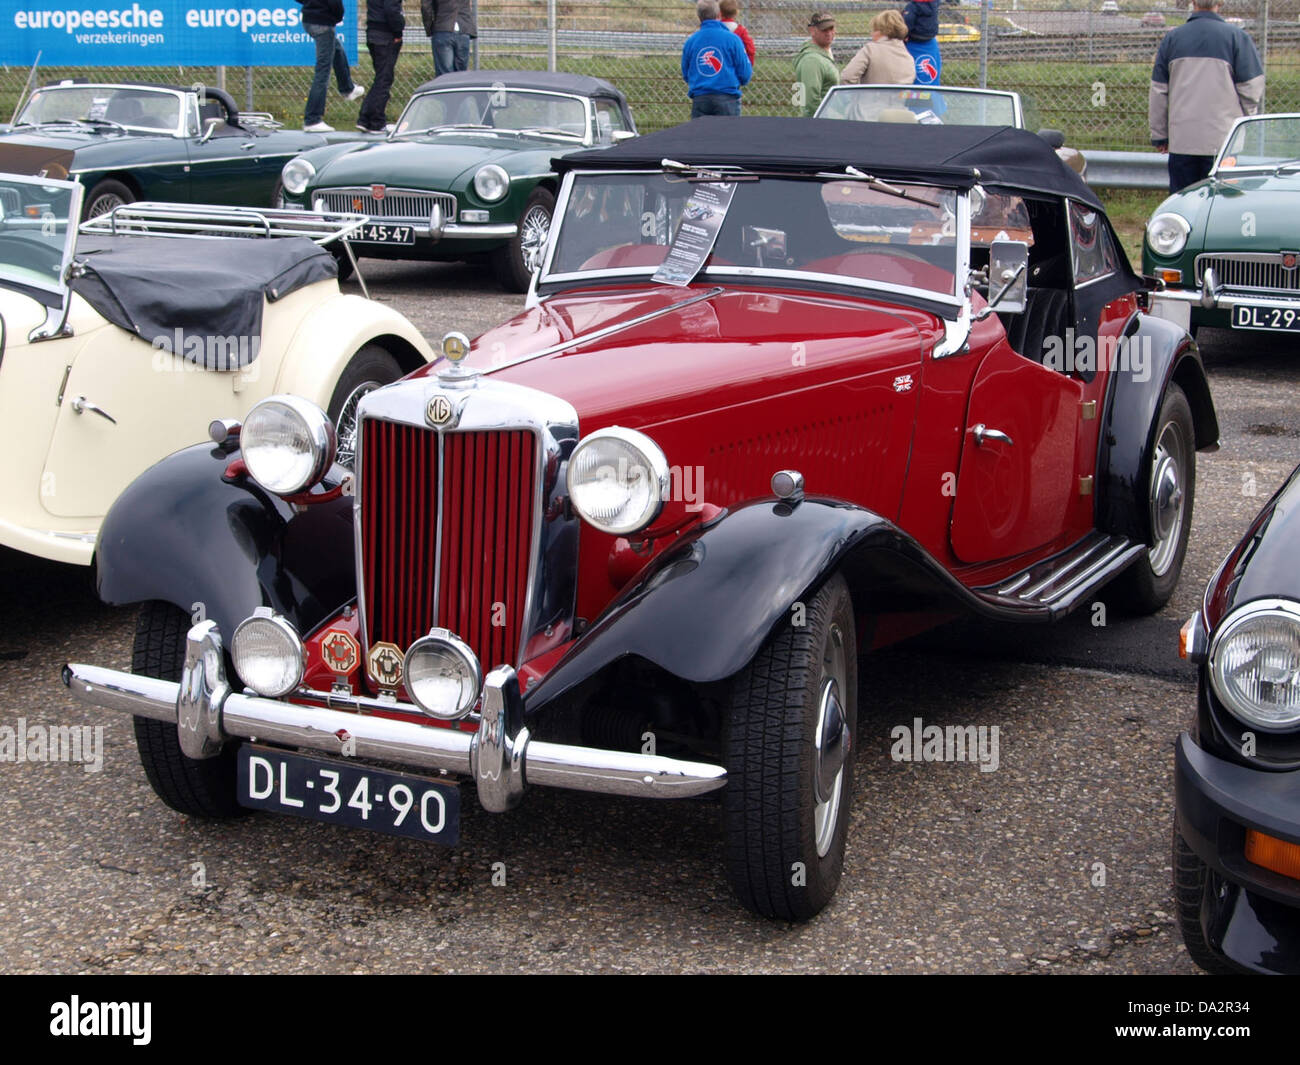 1951 MG TD, DL-34-90 pic1 Stock Photo